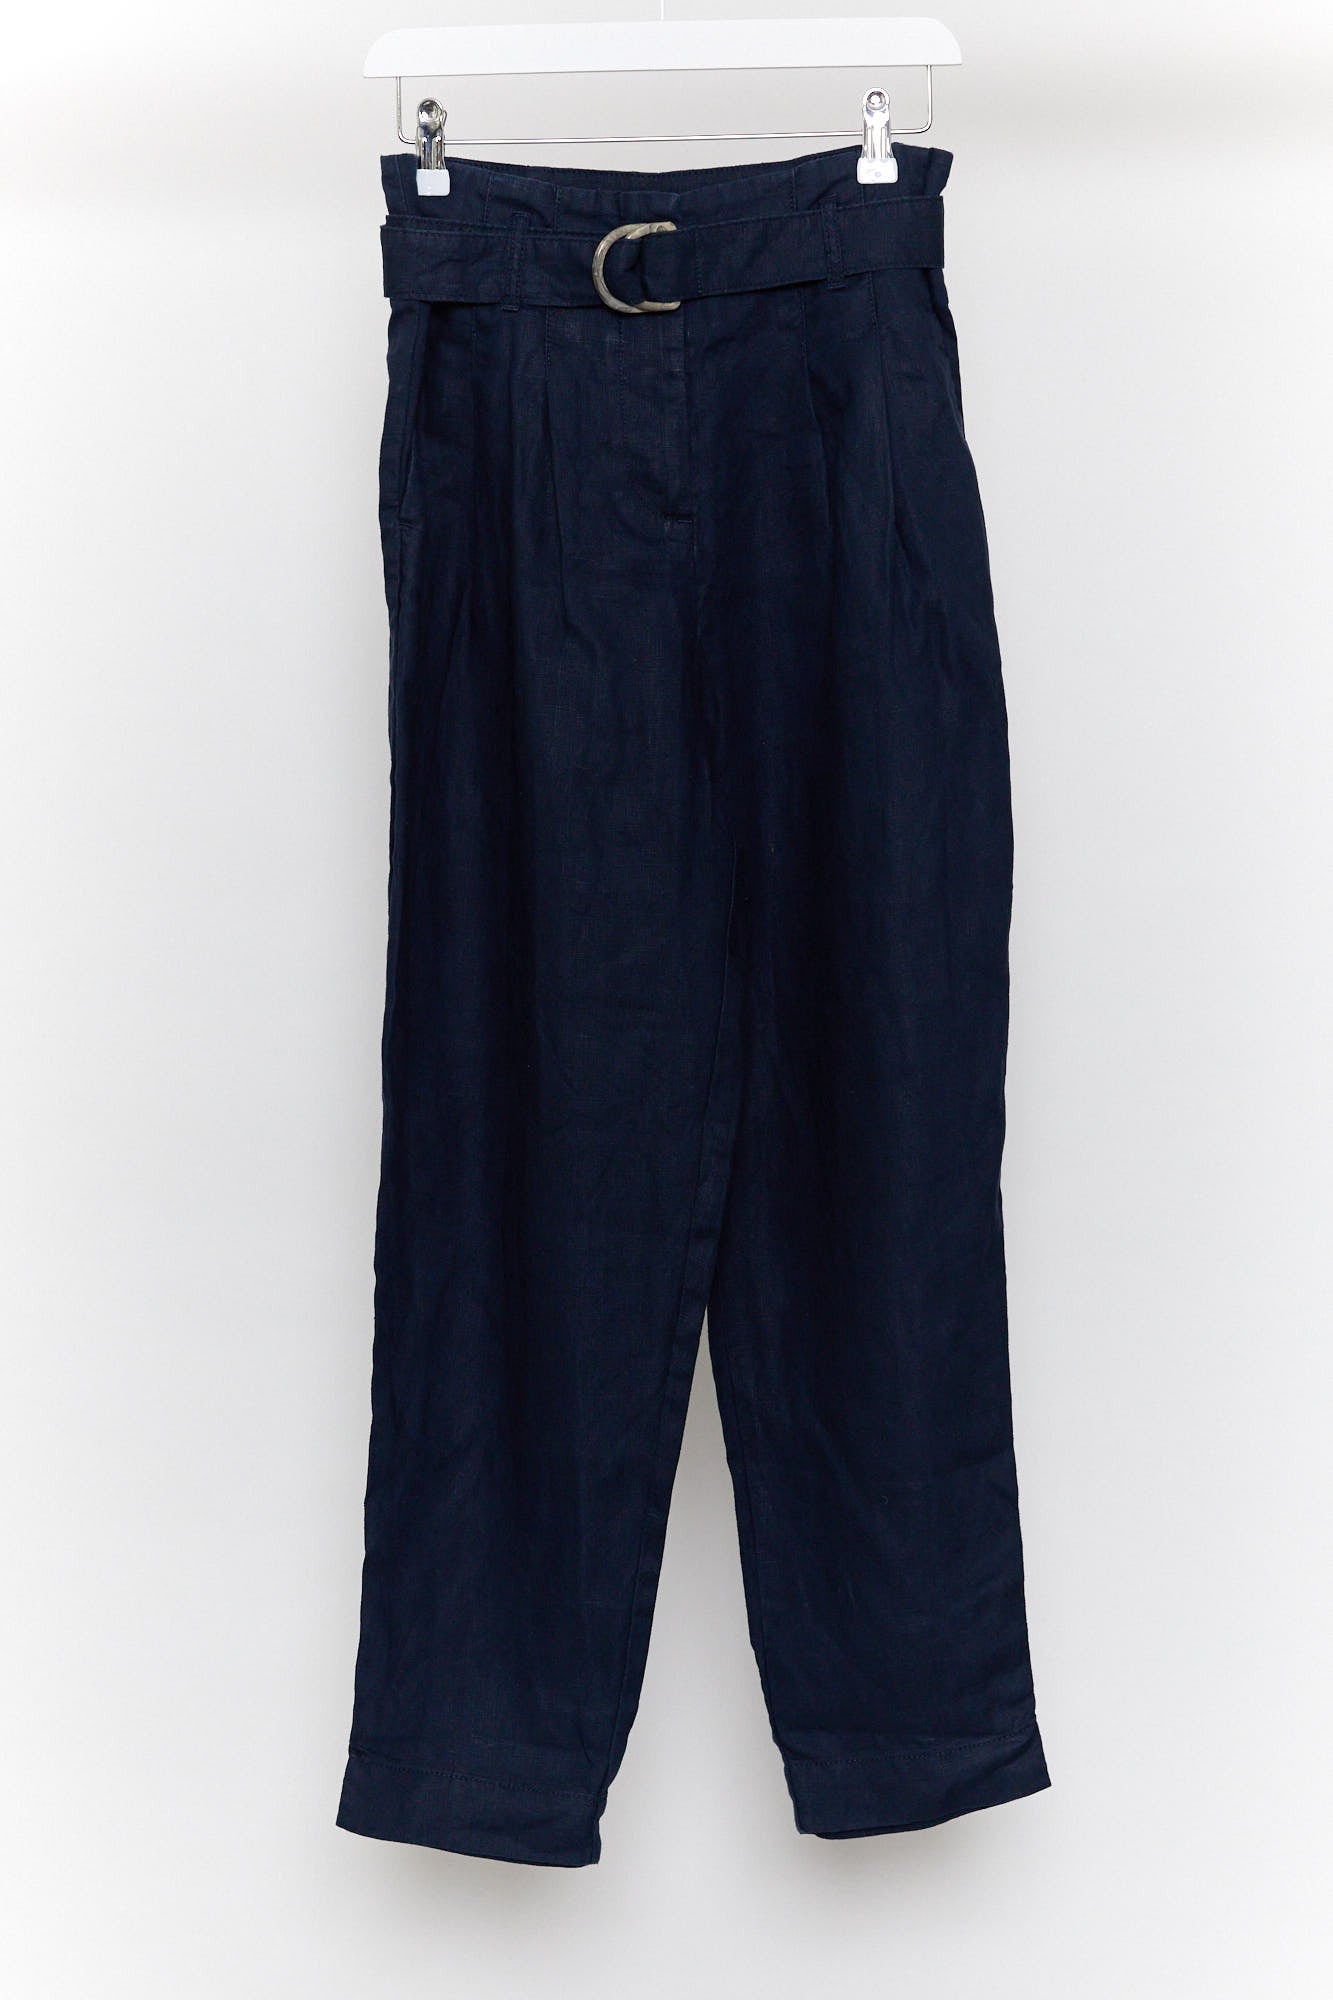 Womens Navy linen M&S Trousers size 10